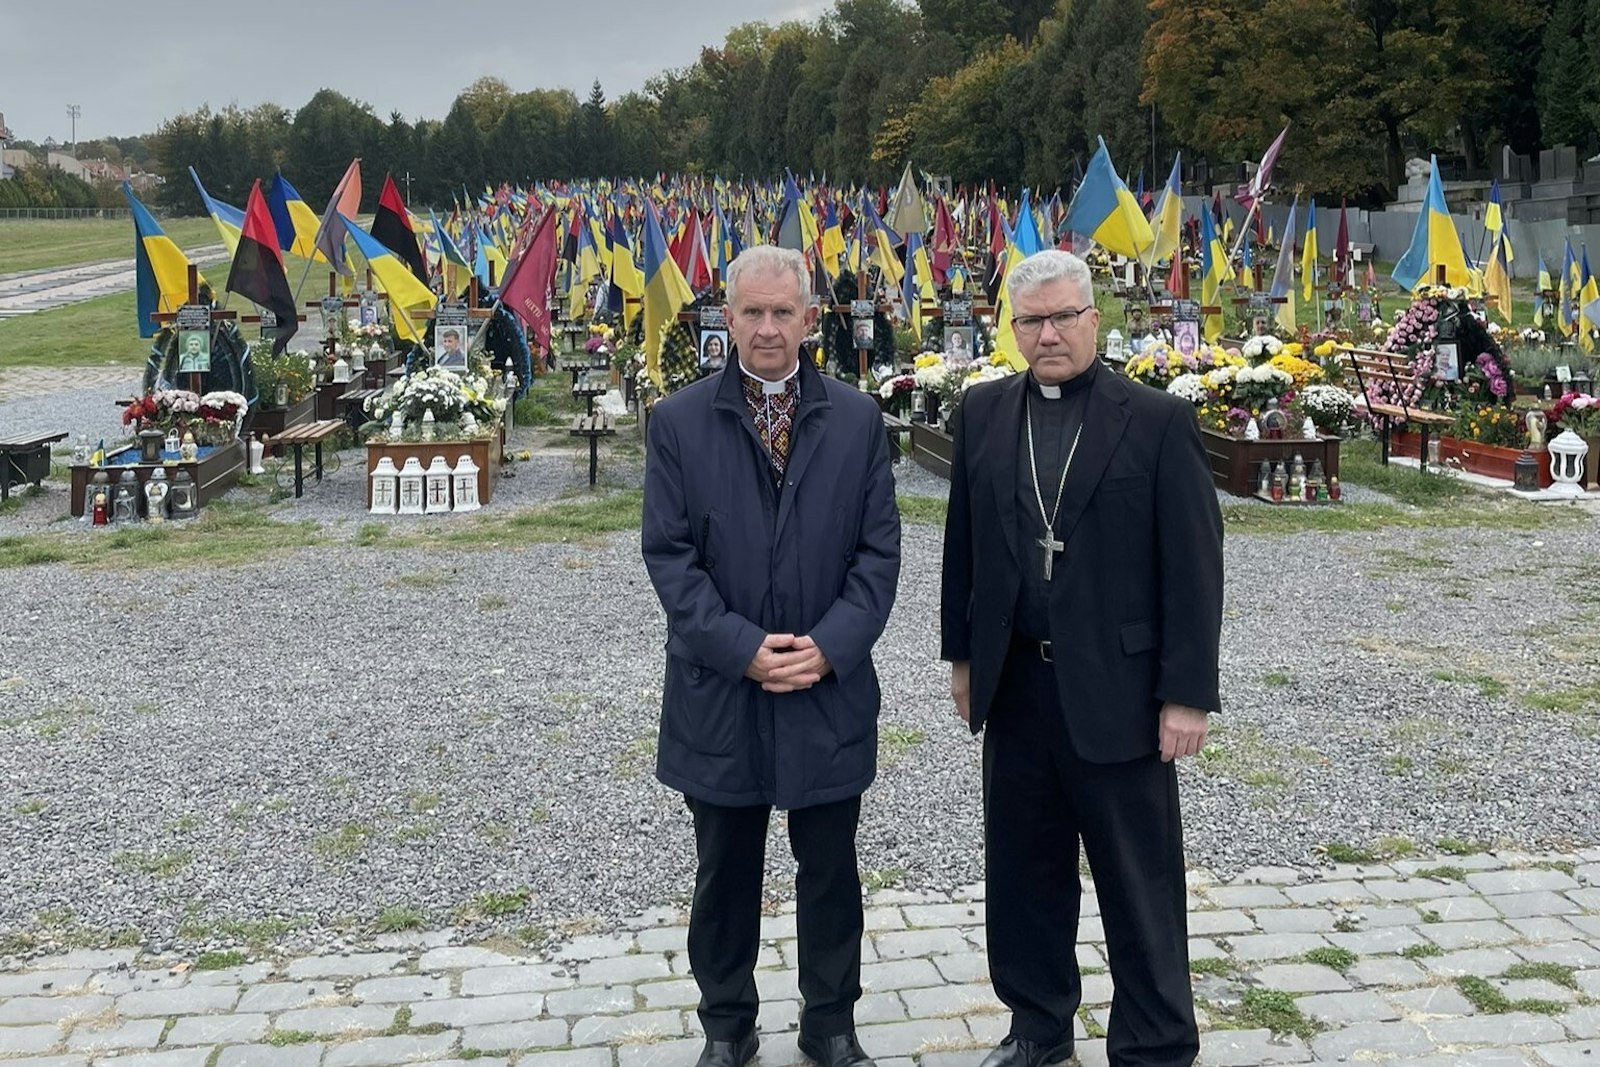 Bishop Monforton stands with Fr. Bohdan Prakh, former president of the Ukrainian Catholic University in Lviv, at a military cemetery in Lviv, Ukraine. While in Lviv, Bishop Monforton spoke with family members who have lost loved ones during the war effort. According to Lviv's mayor, every day the city loses between one and three soldiers killed in the war.